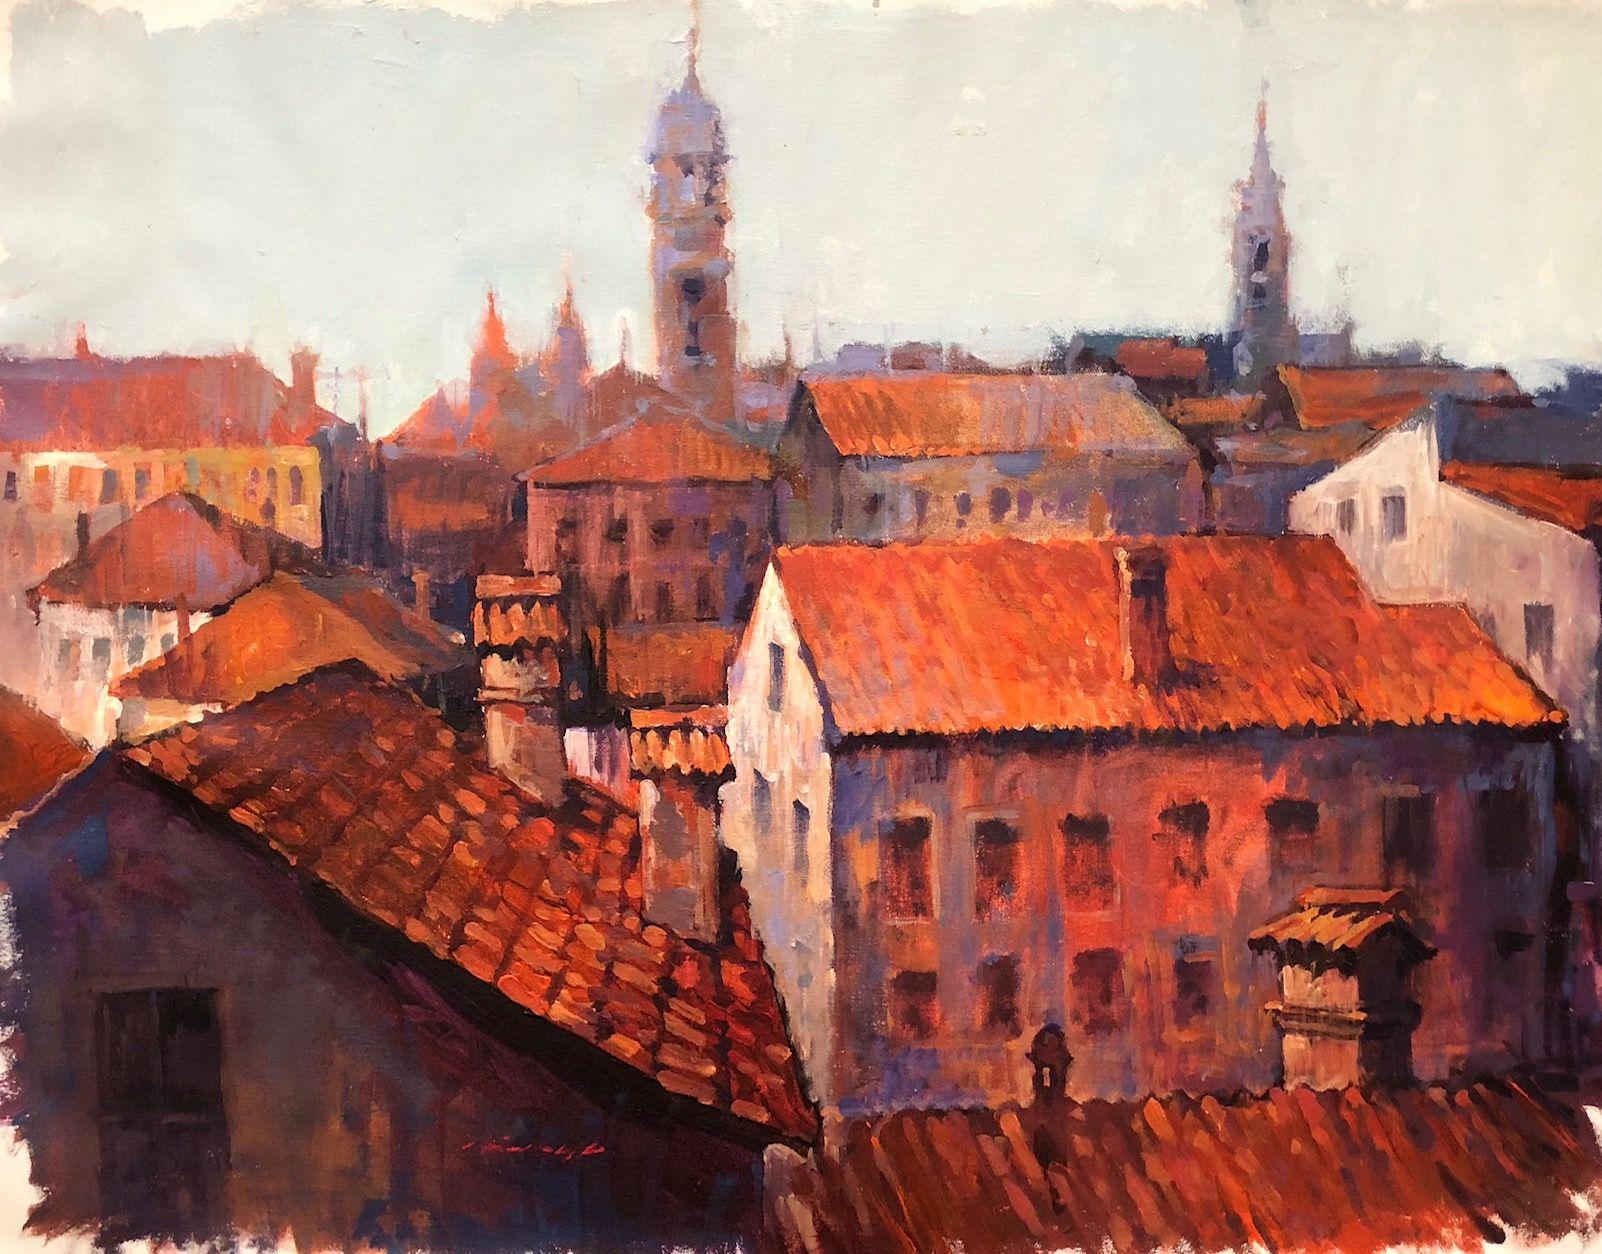 Venice Rooftops - Oil on Canvas